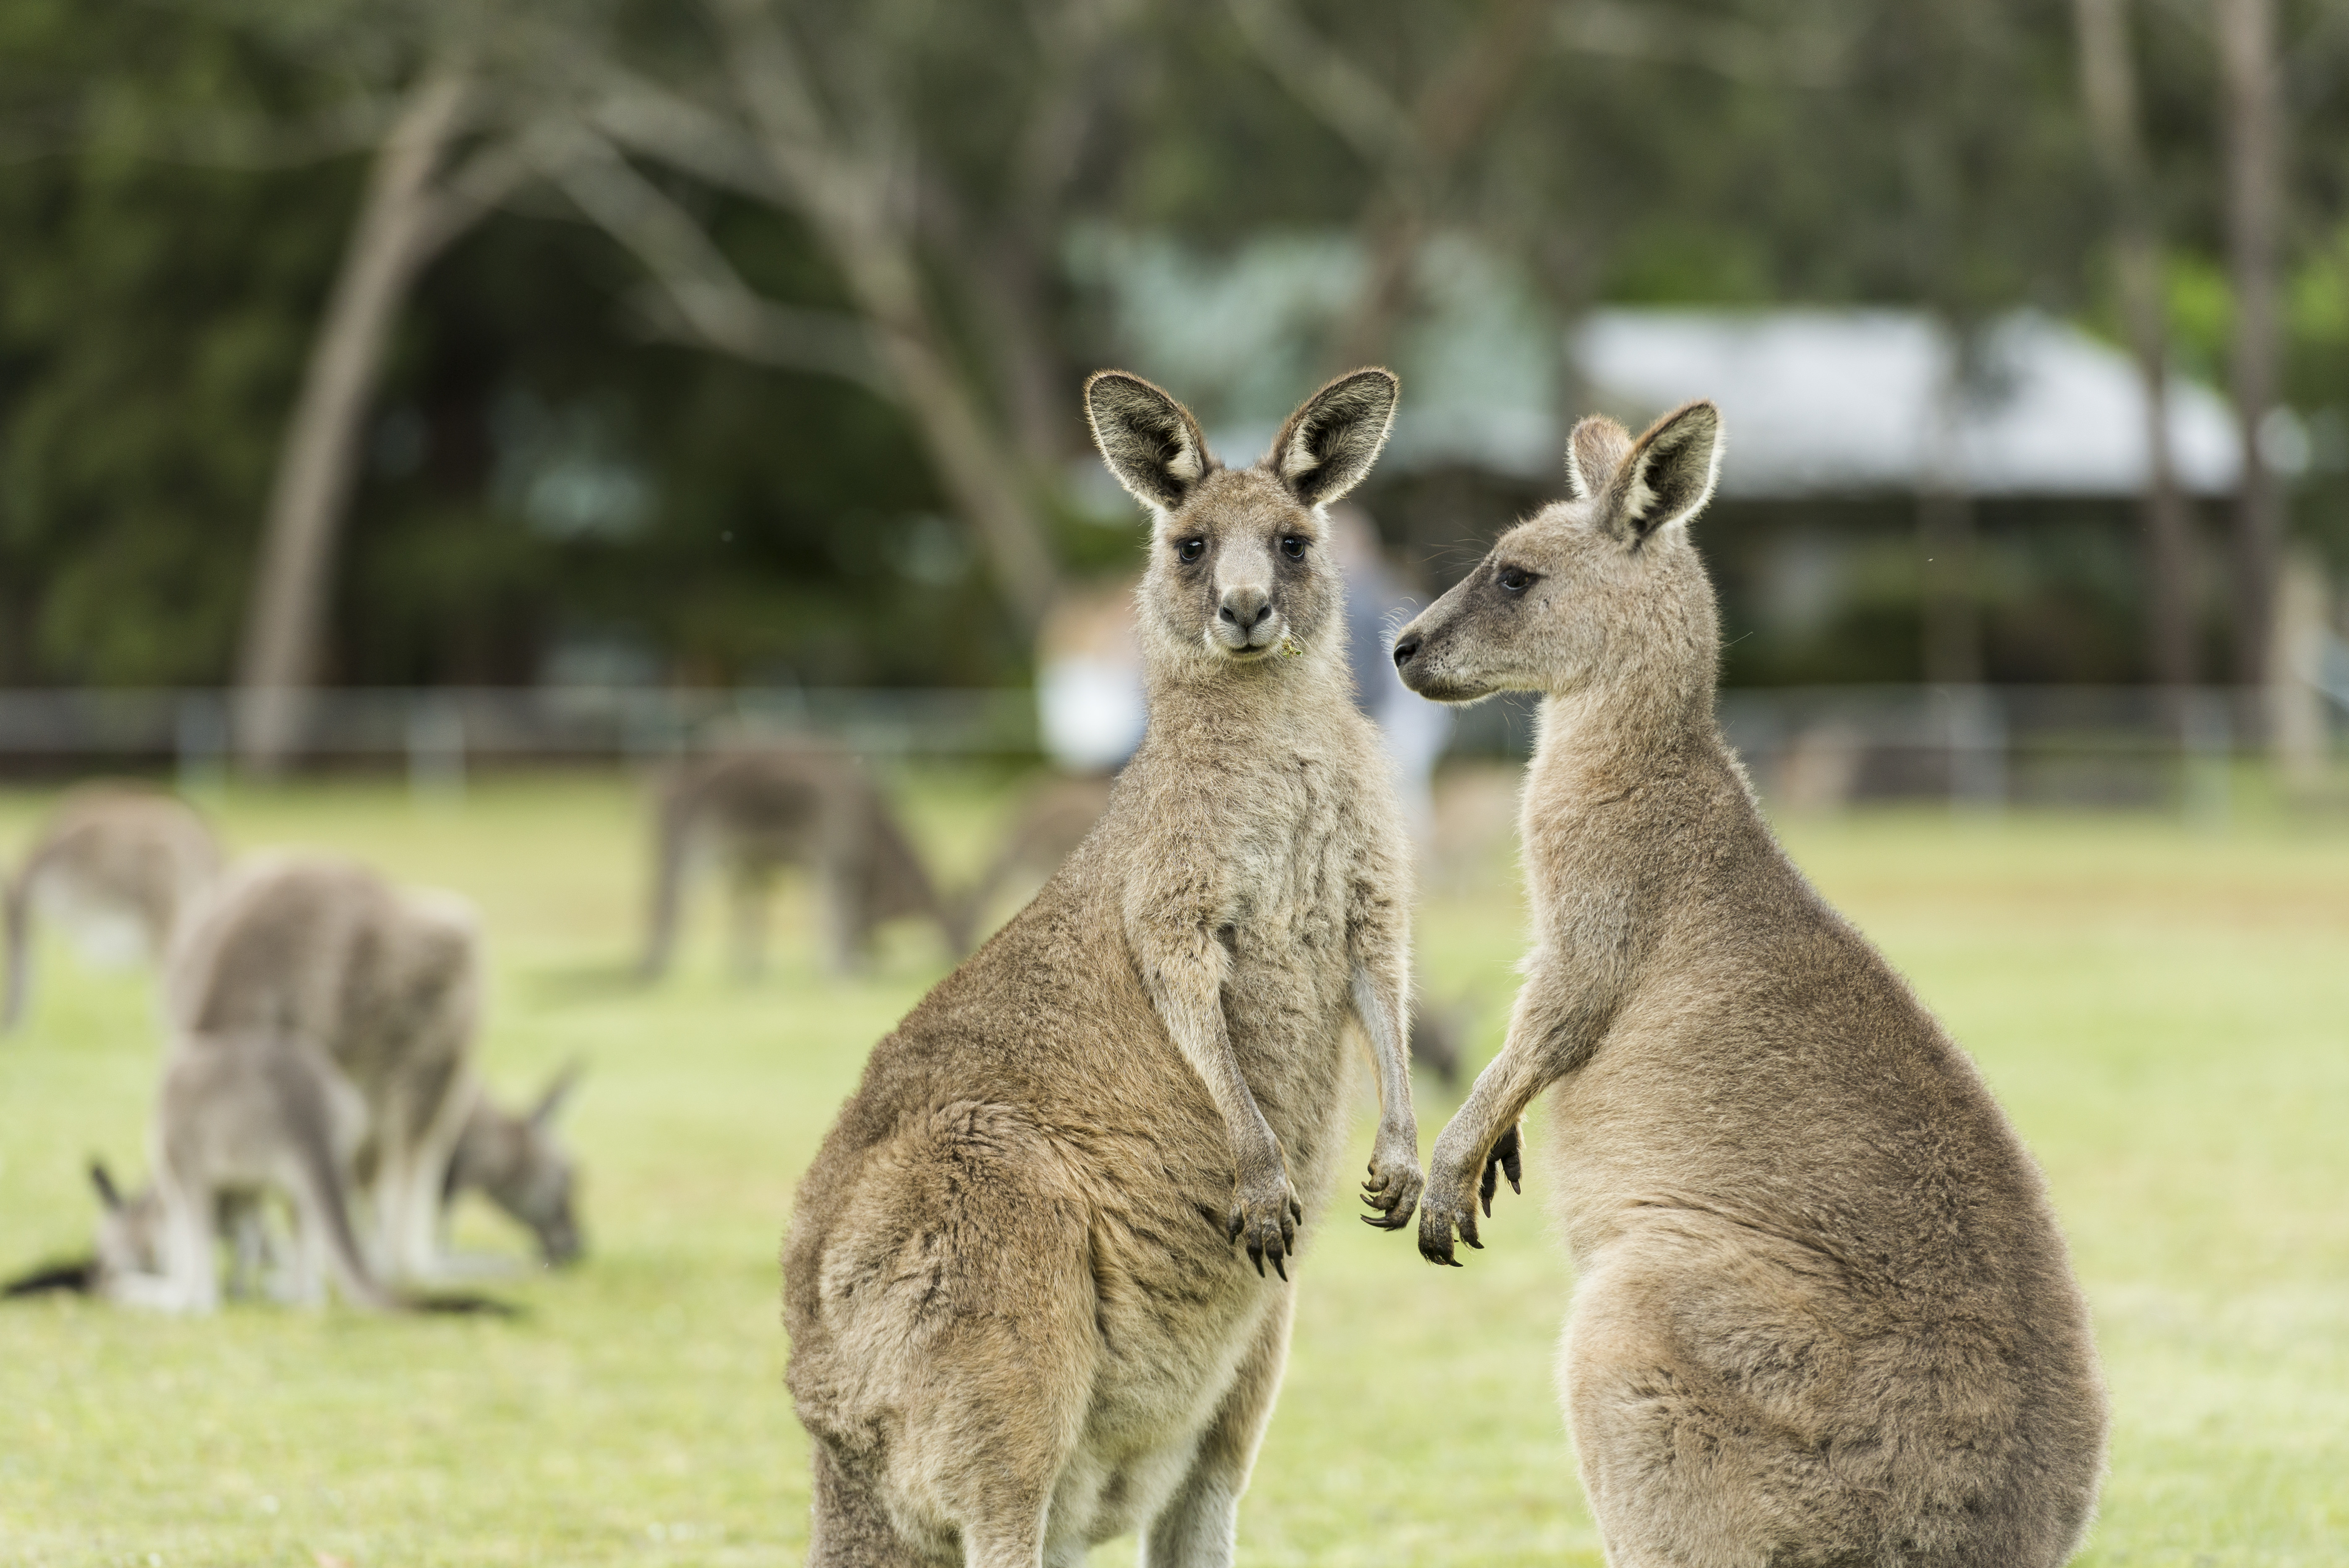 2-Day Melbourne to Adelaide (Standard Double/Twin Room) | All National Park Entrance Fees | Air-conditioned Small Group Travel